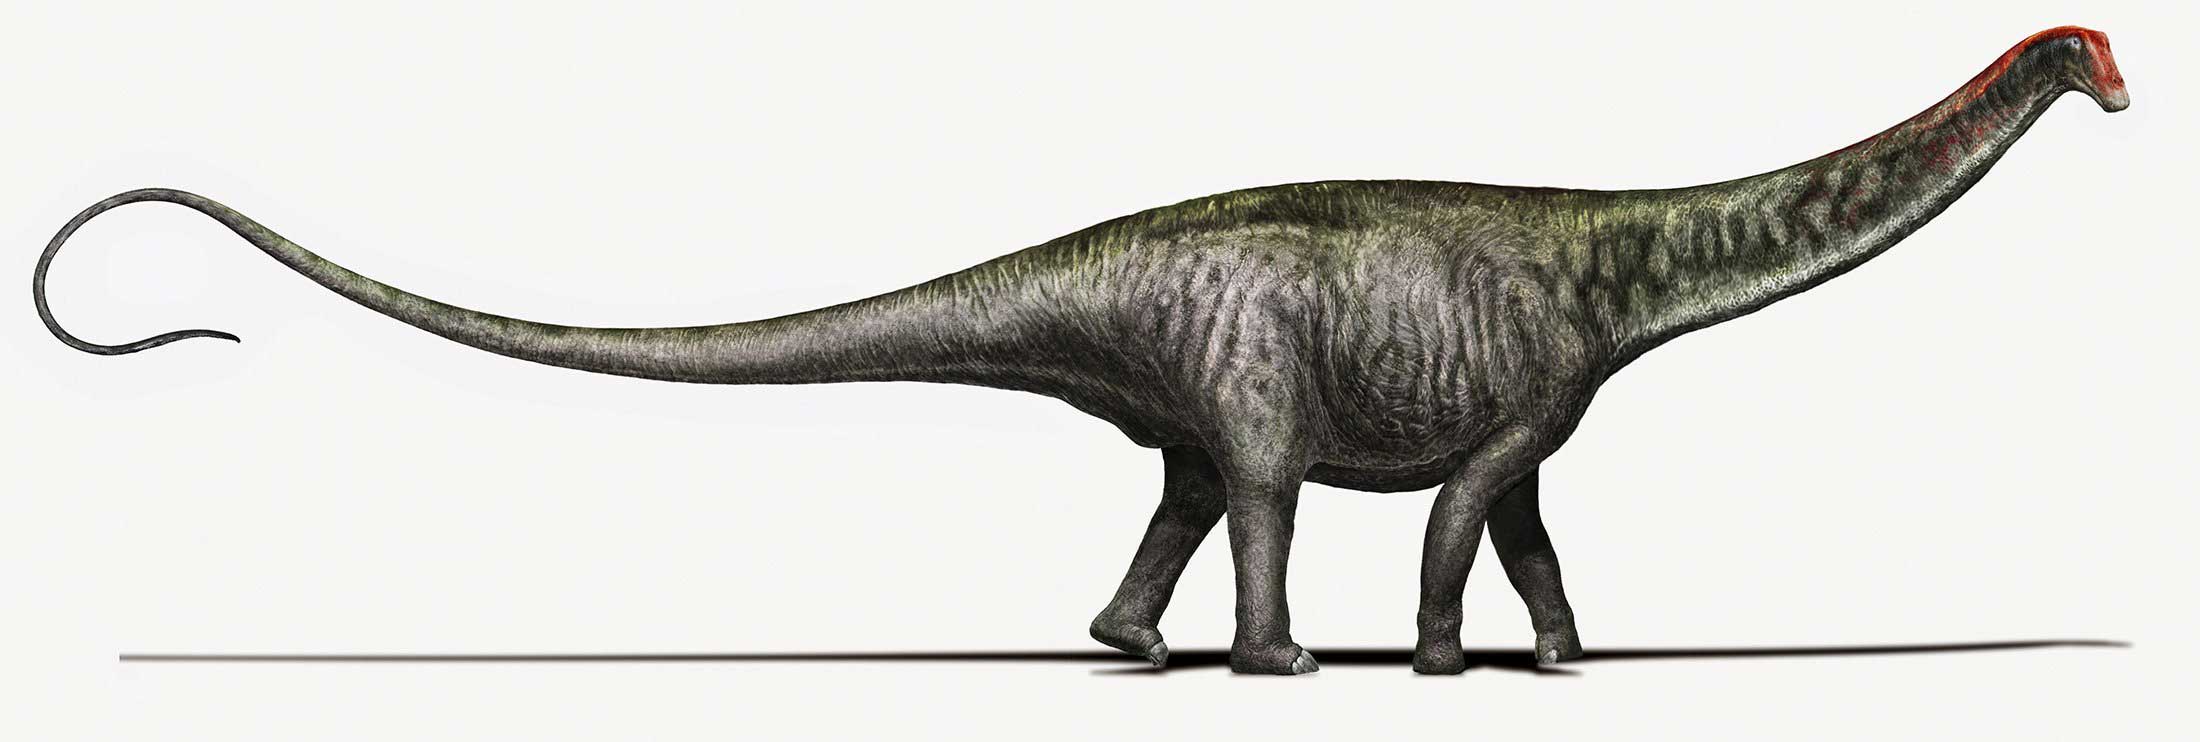 Artist's rendering of a Brontosaurus with a Diplodocus-like head